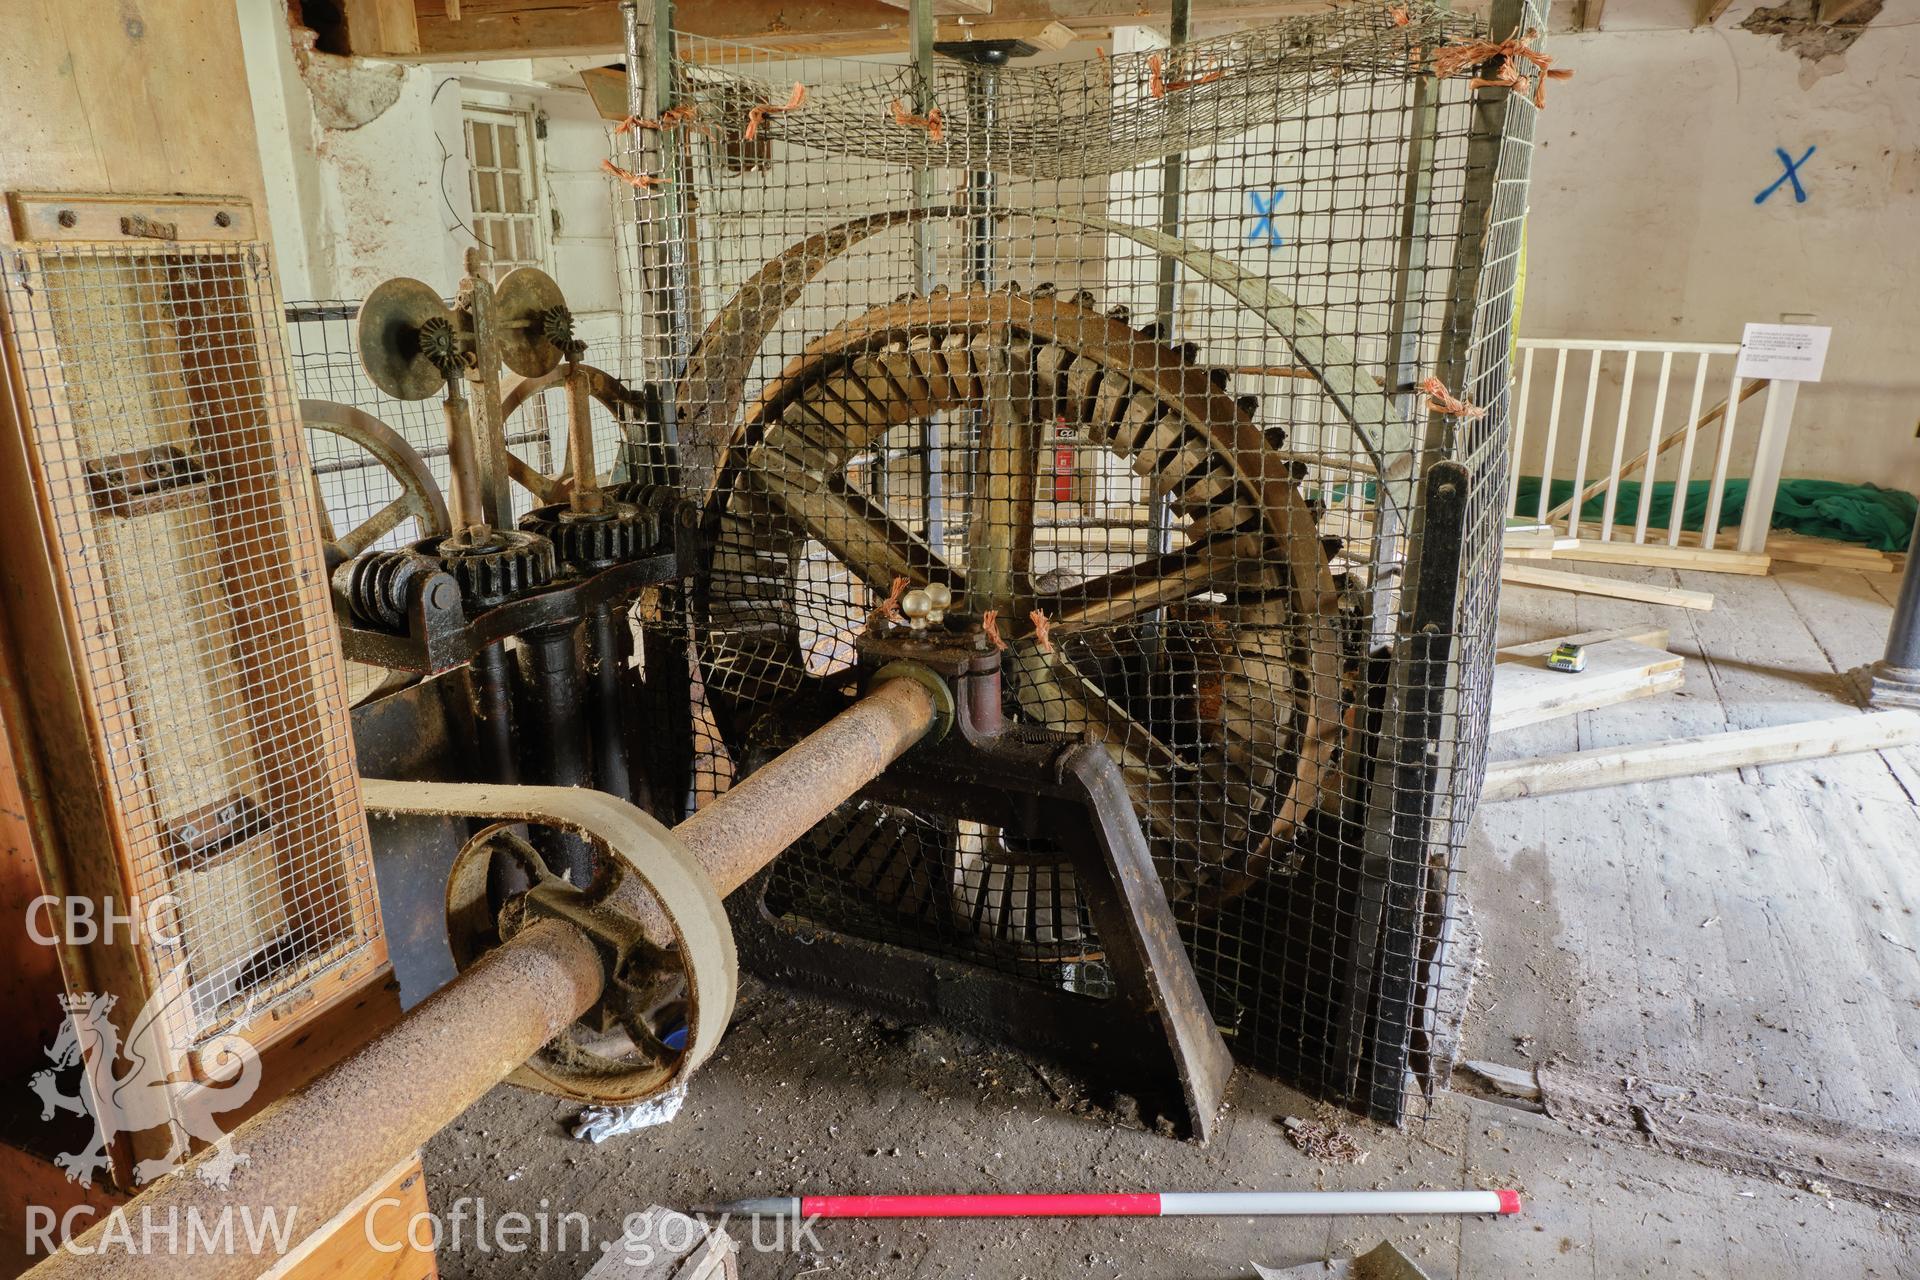 Colour photograph showing Blackpool Mill - ground floor, end of lay shaft over turbine, looking SW. Produced as part of Historic Building Recording for Blackpool Mill, carried out by Richard Hayman, June 2021.